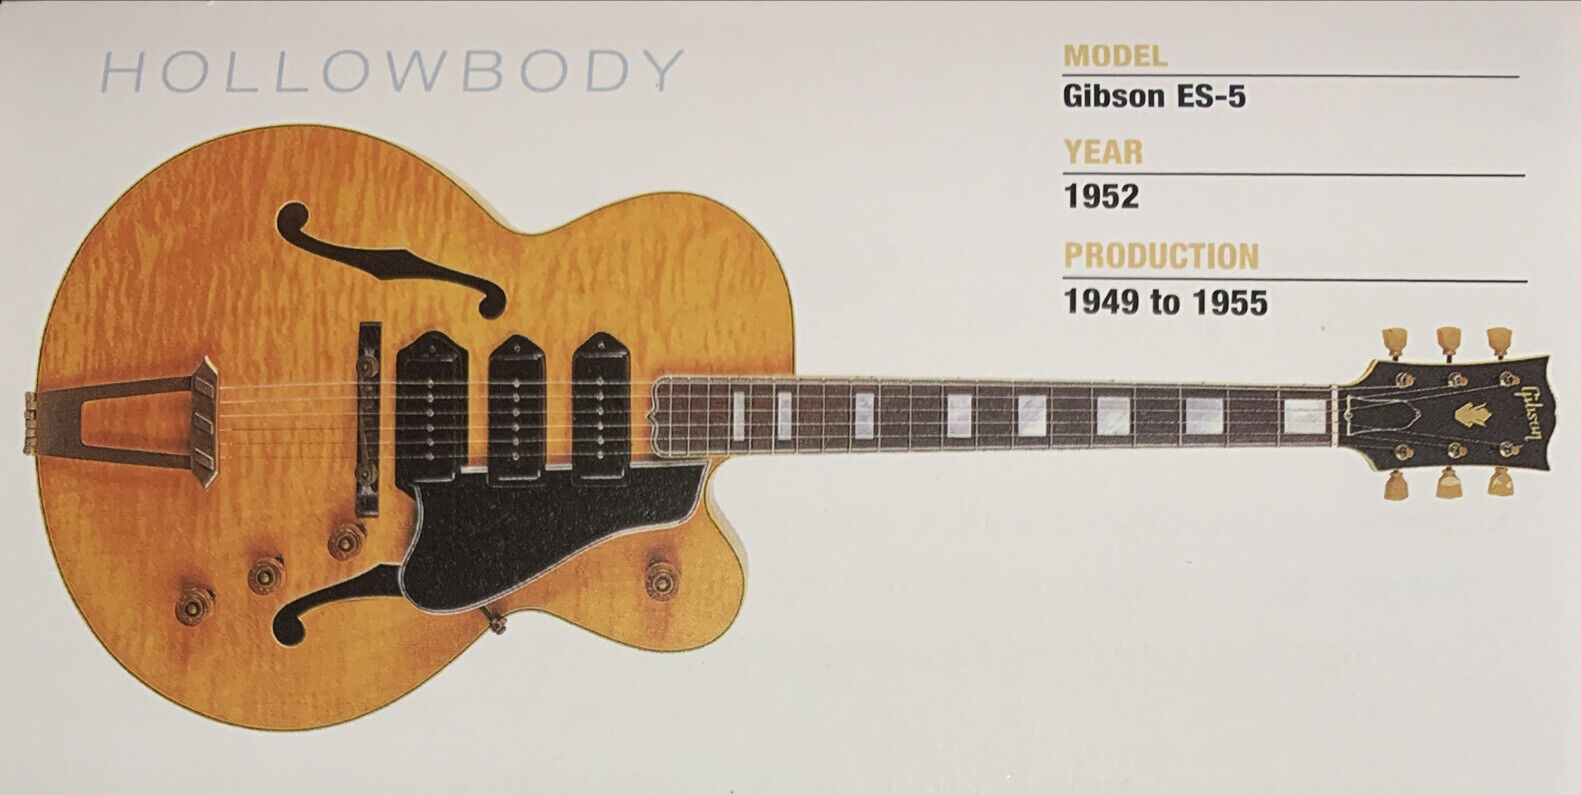 Primary image for 1952 Gibson ES-5 Hollow Body Guitar Fridge Magnet 5.25"x2.75" NEW